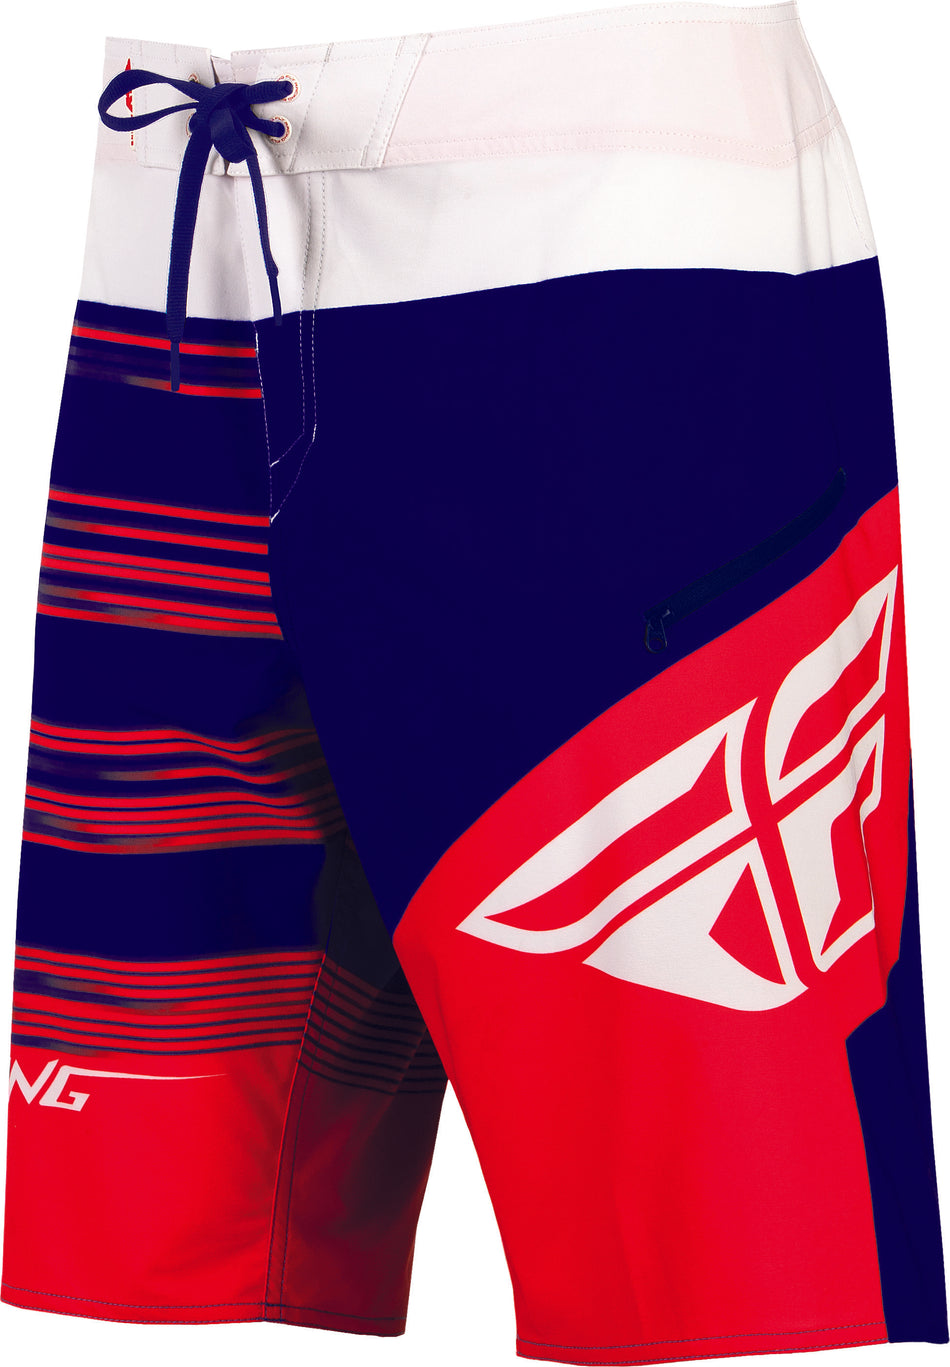 FLY RACING Influx Boardshorts Red/Blue/White Sz 32 353-19232